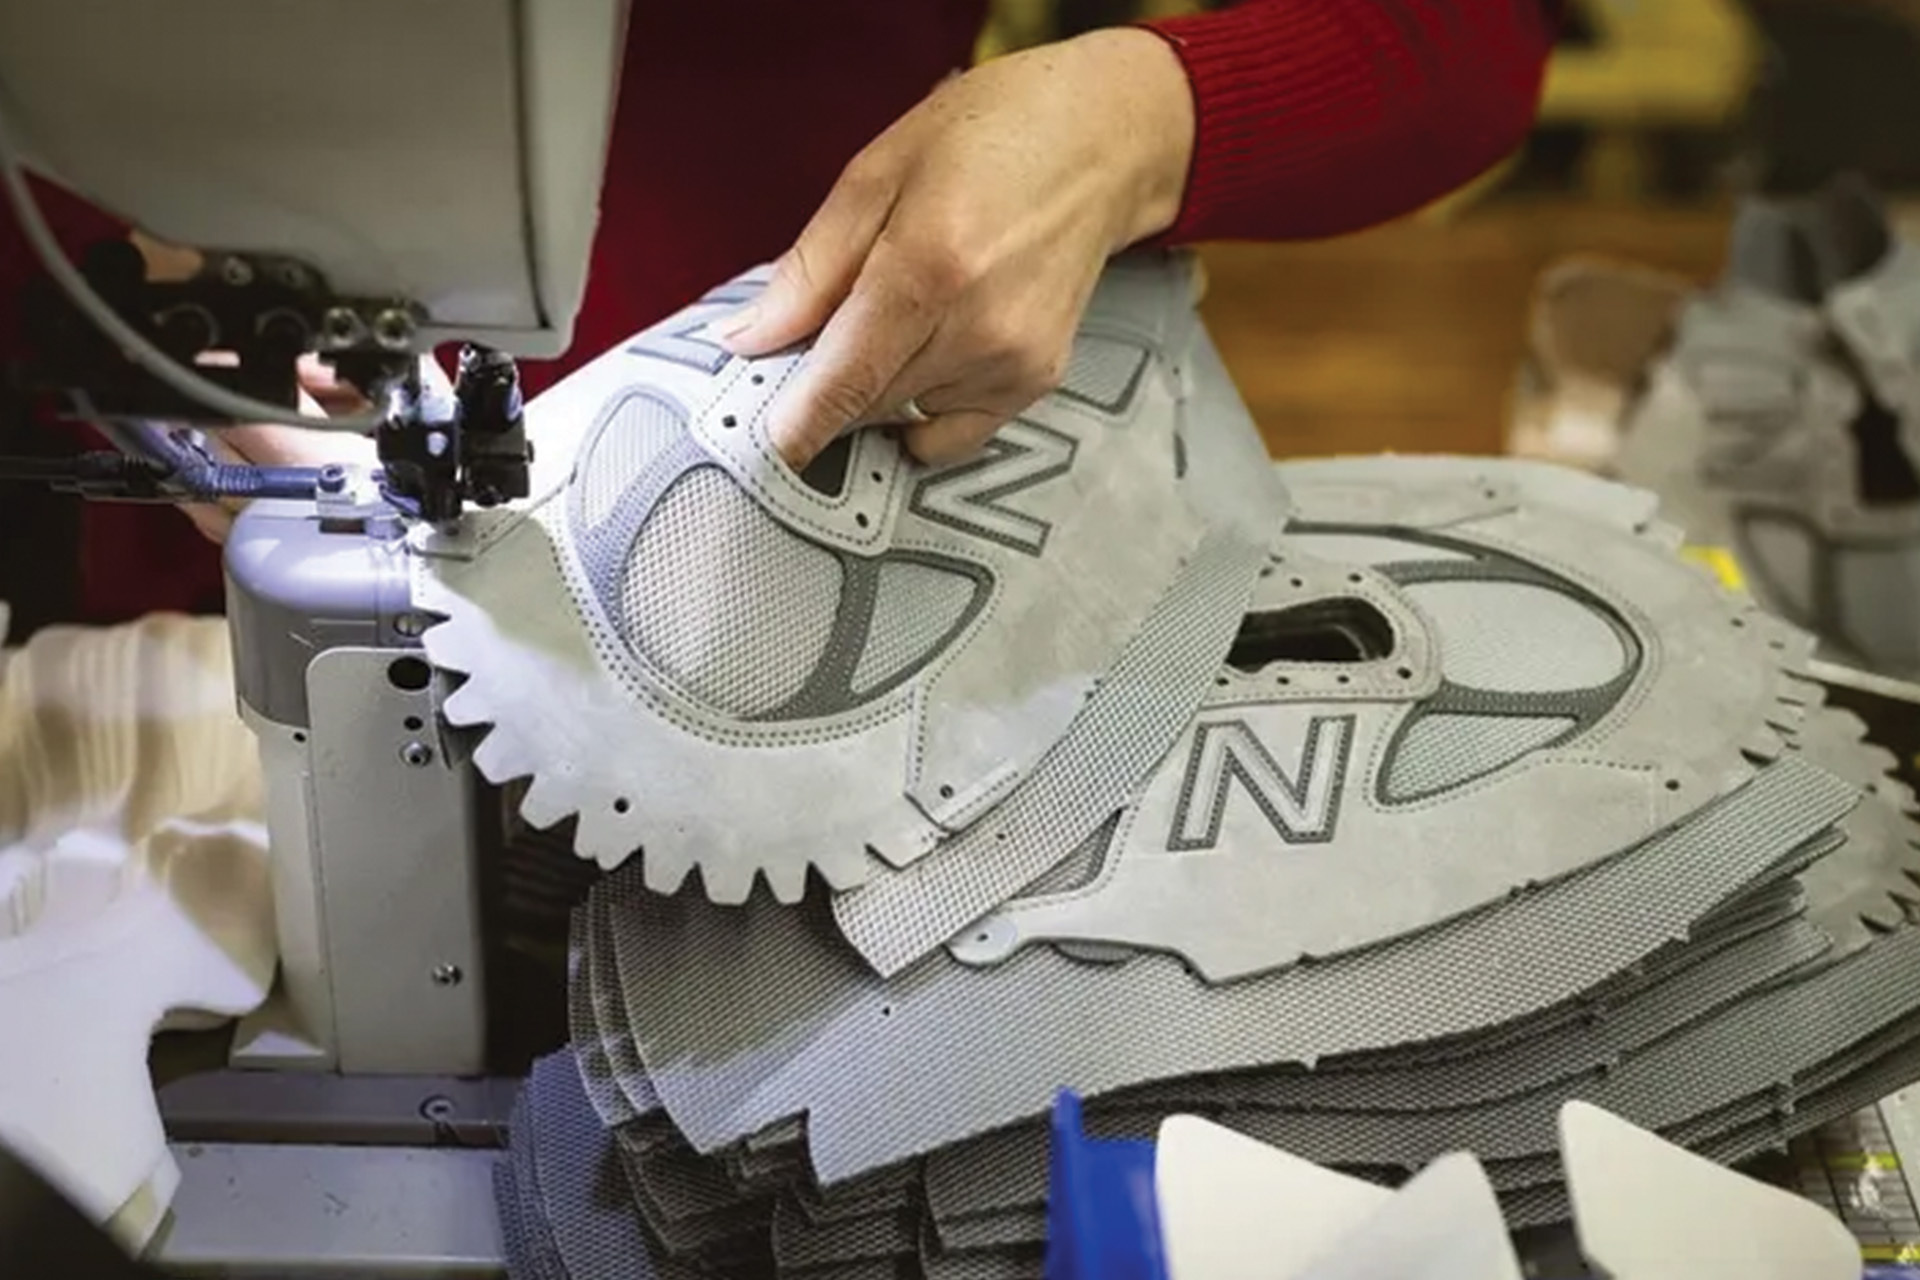 New Balance Made: The Crafted Excellence hand-made production.